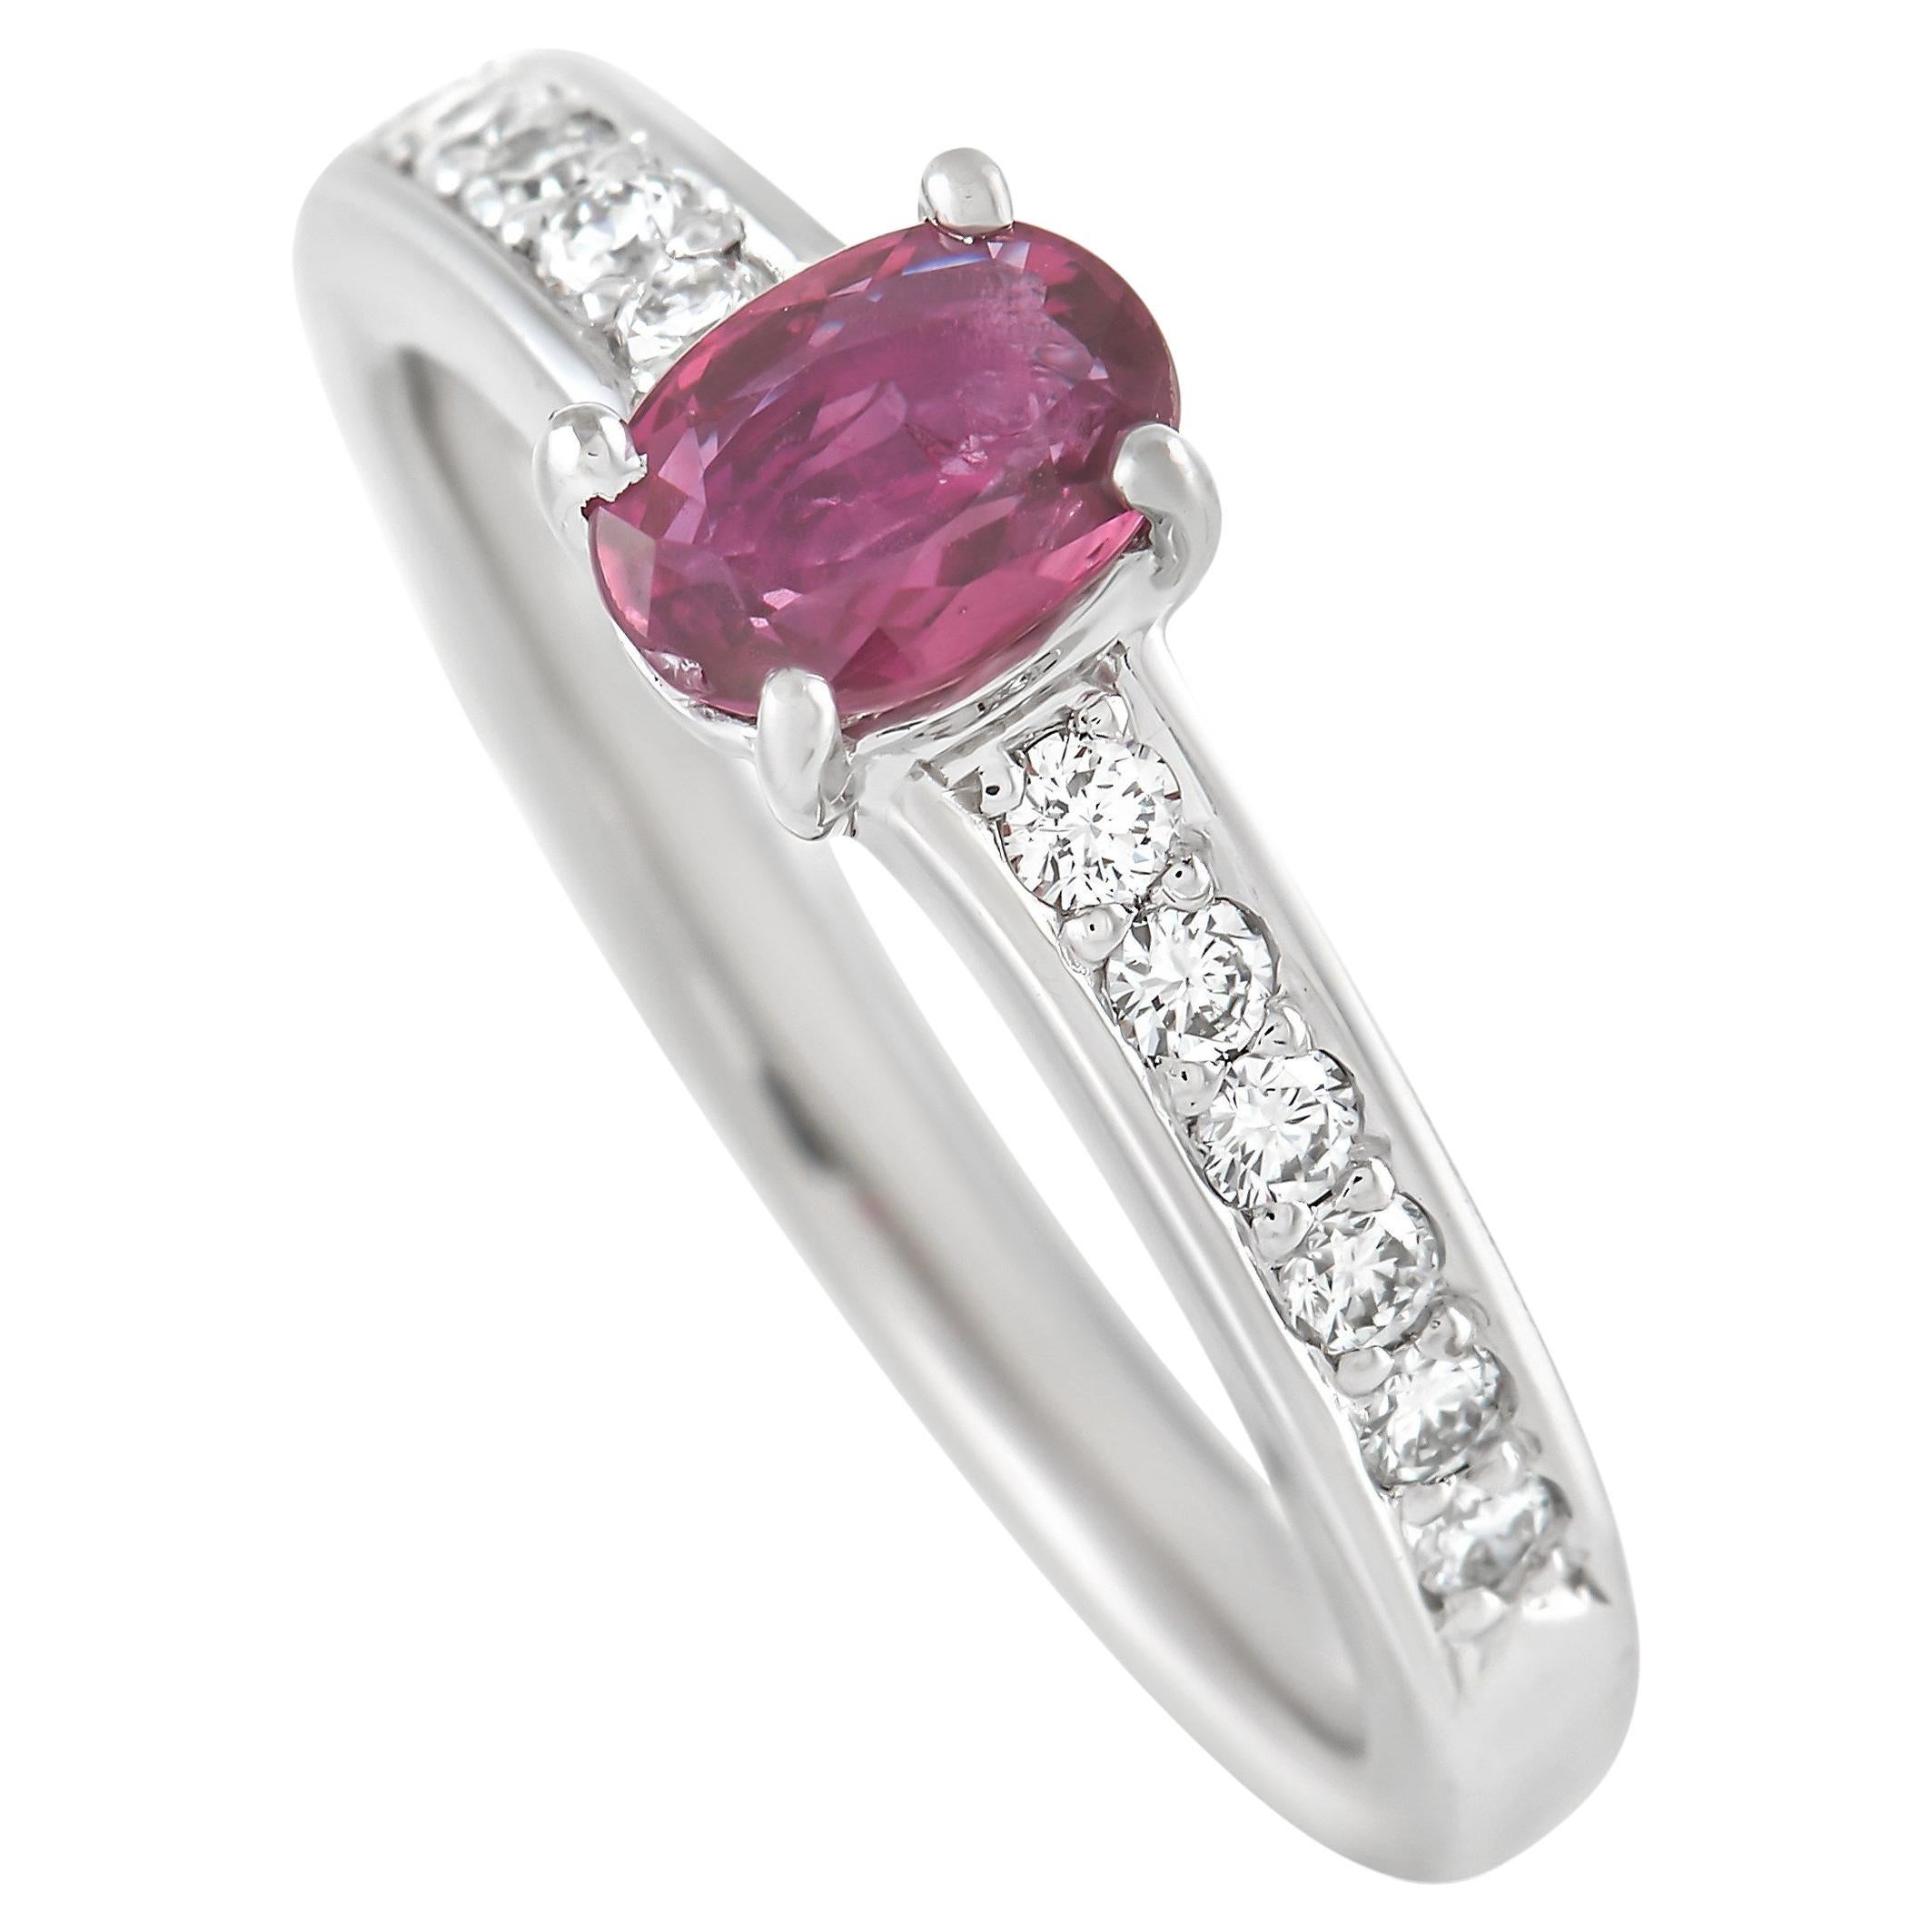 LB Exclusive Platinum 0.20 Ct Diamond and Ruby Ring